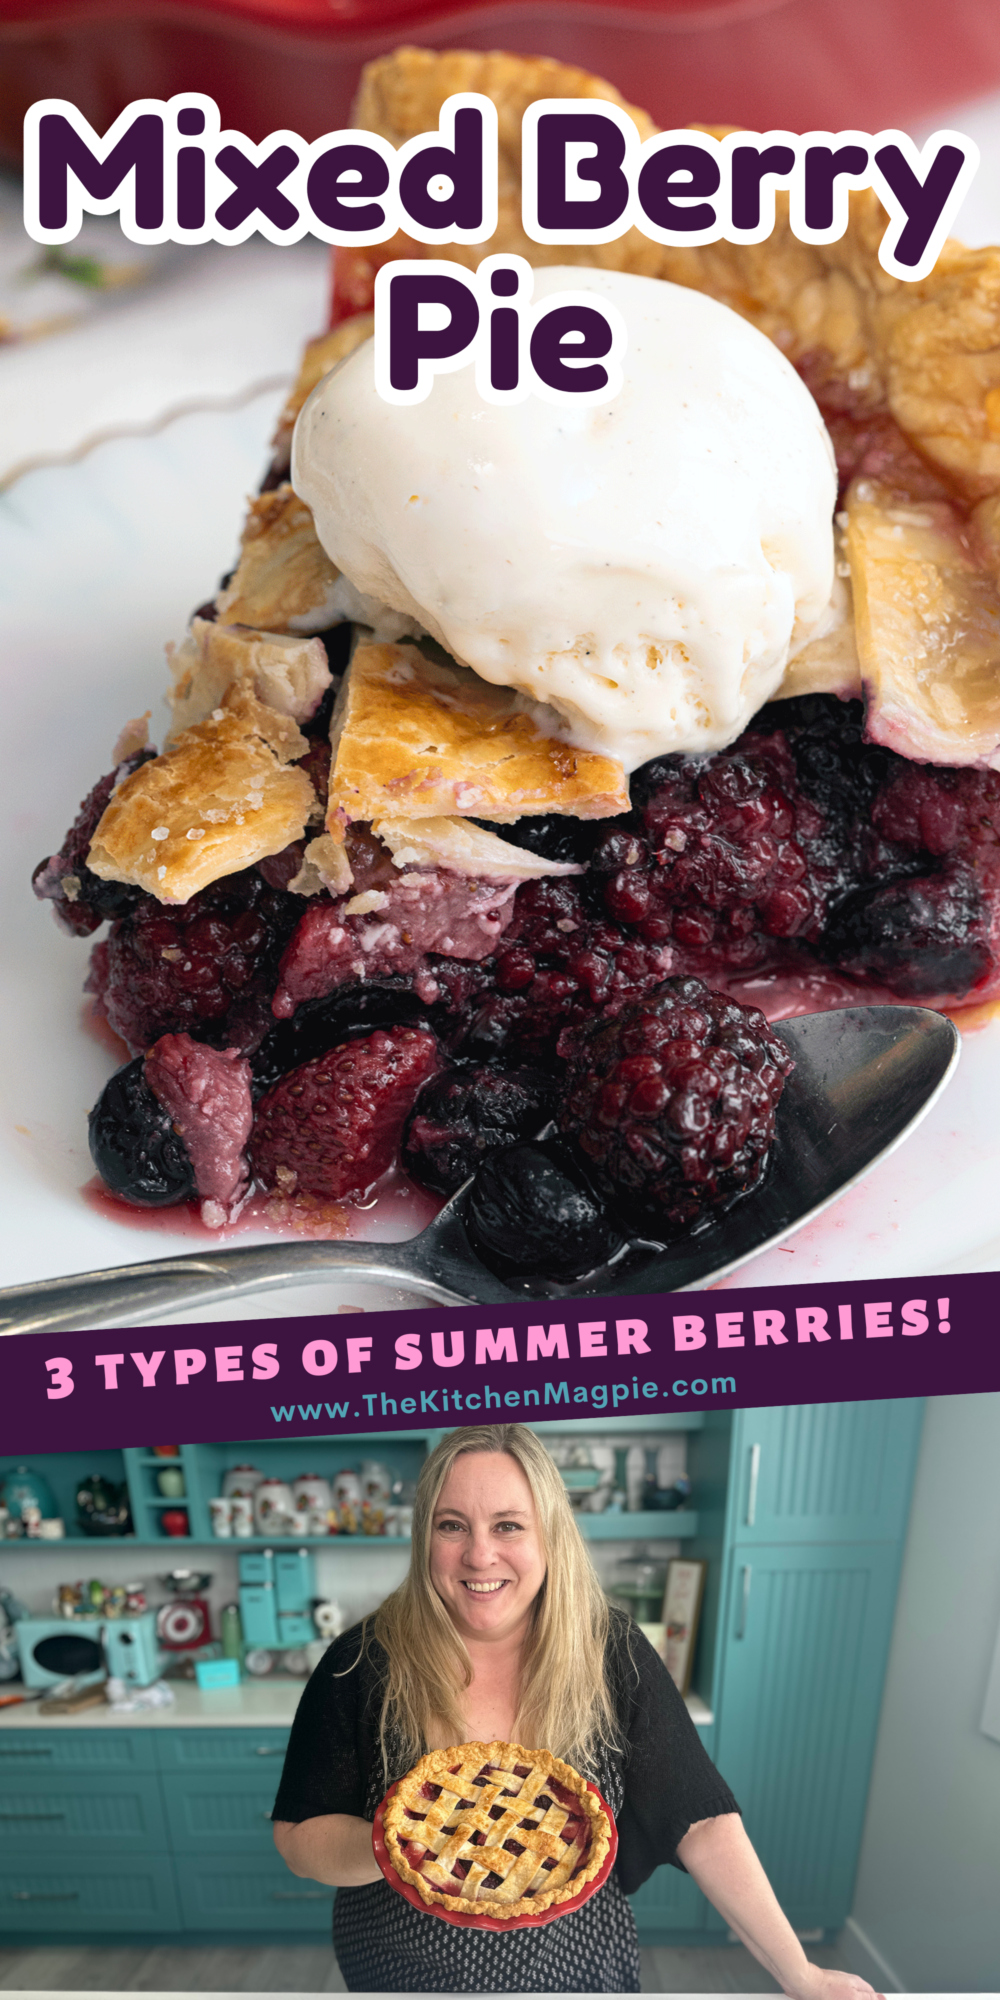 This mixed berry pie with blackberries, strawberries and blueberries is the perfect taste of summer berries deliciously baked into a pie! Top with vanilla ice cream and enjoy! 